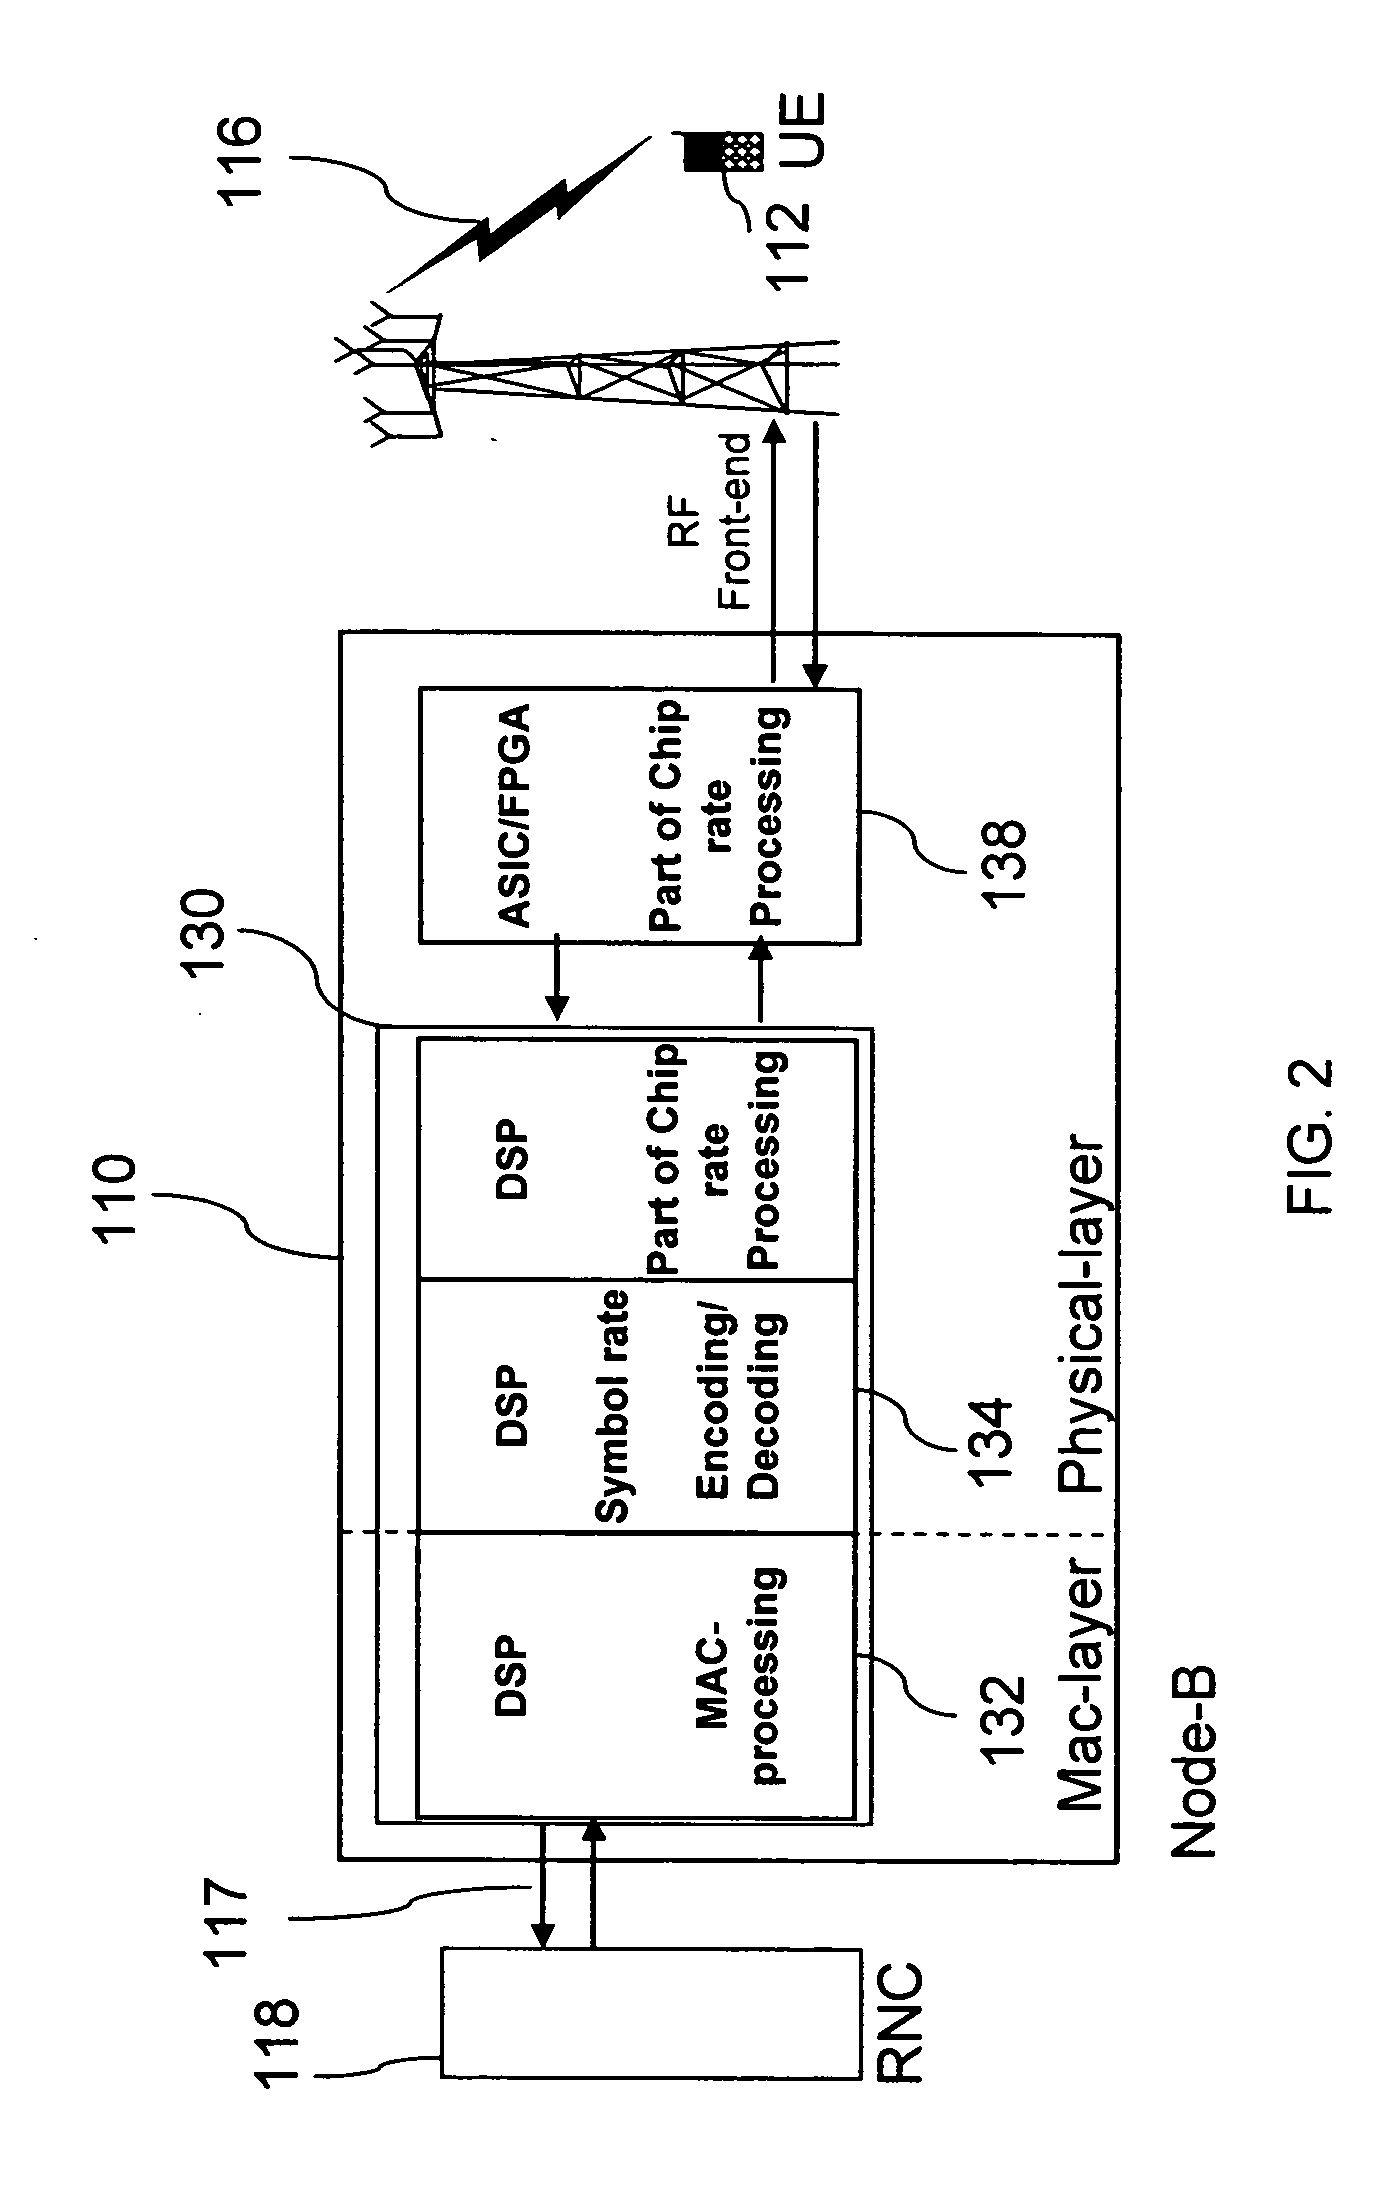 Enhanced processing methods for wireless base stations